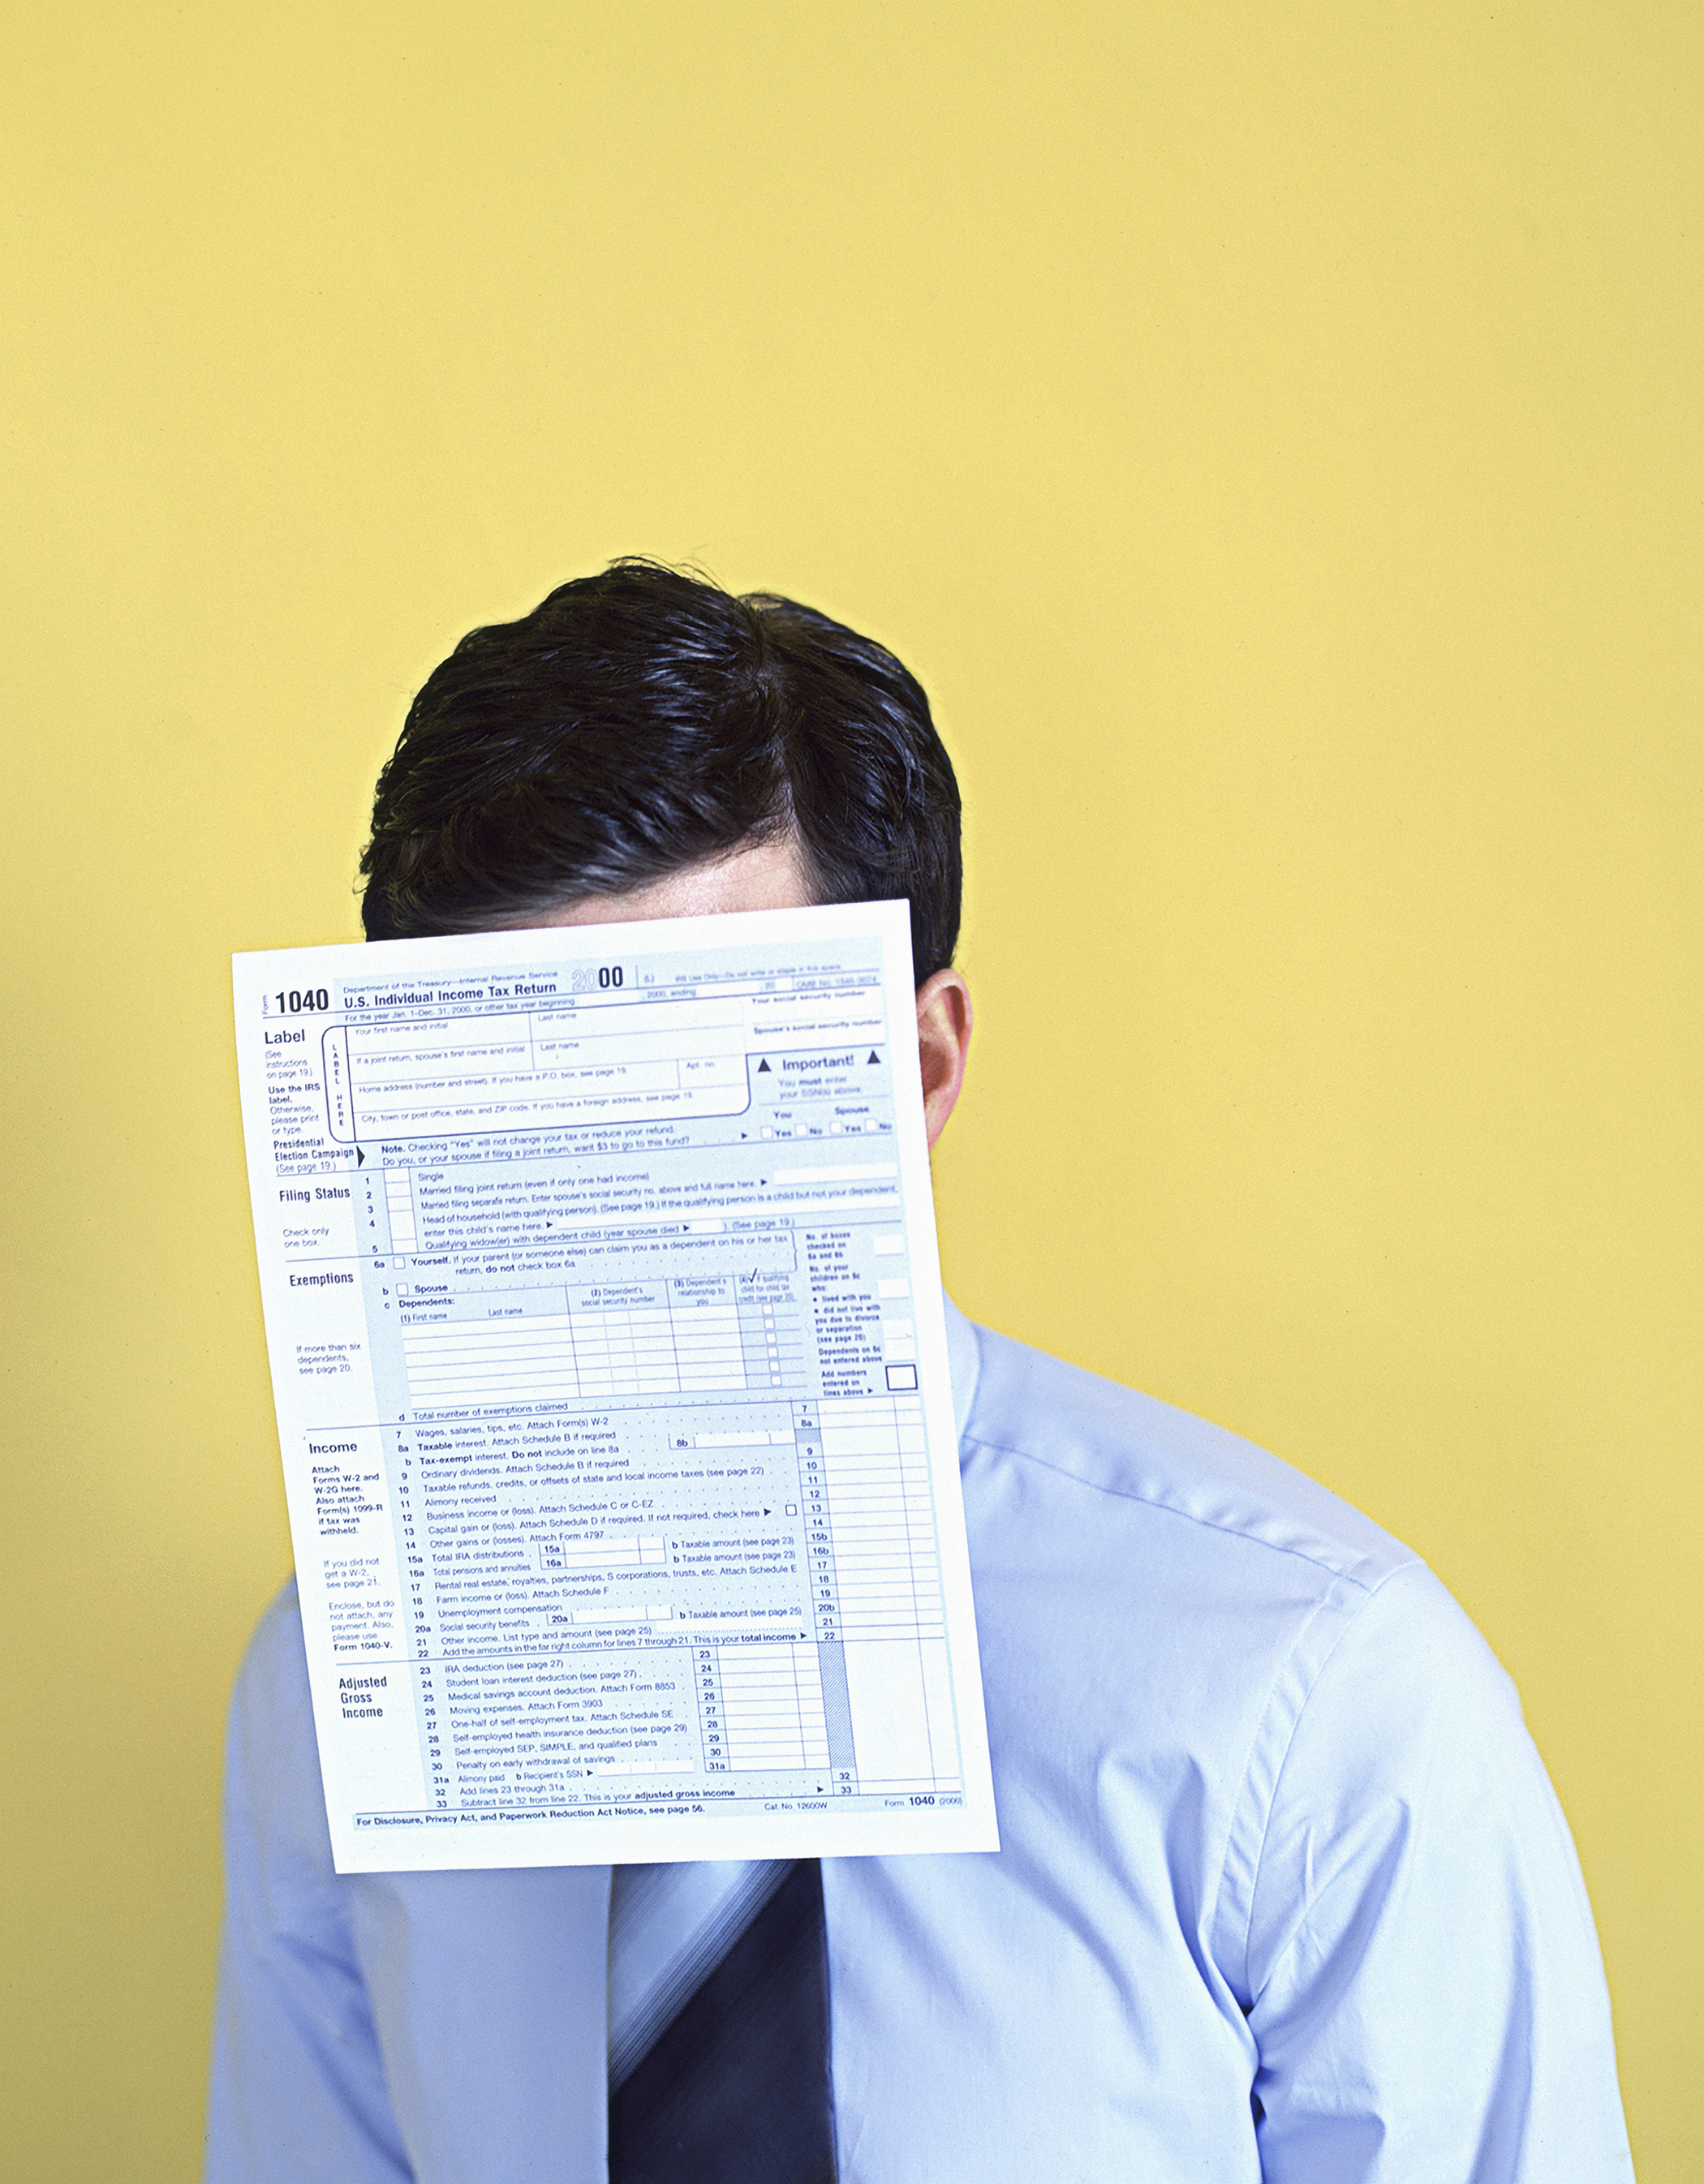 Man With 1040 tax form covering face